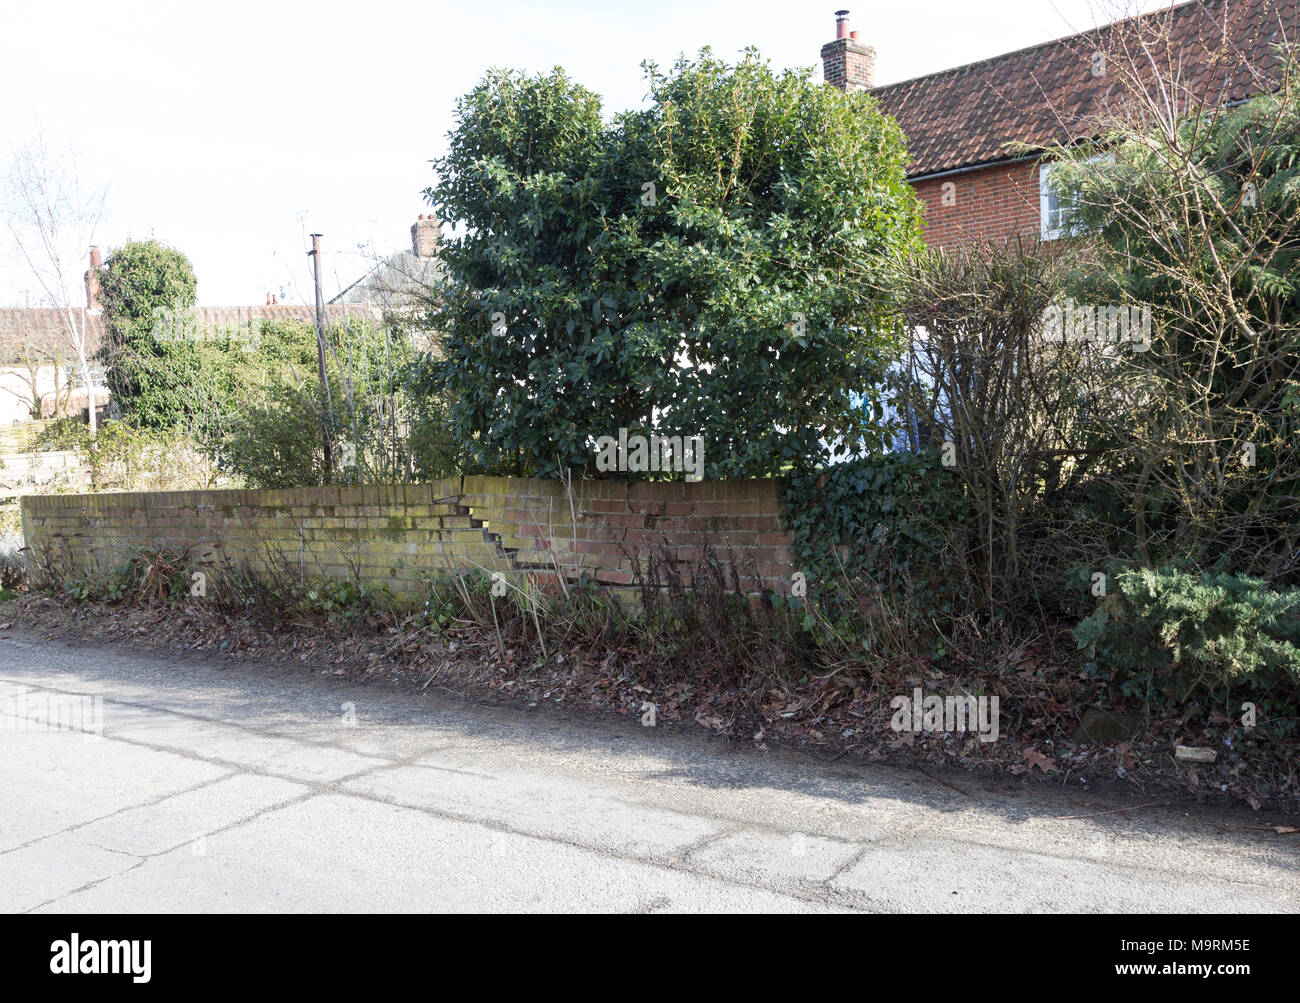 Impact damage to red brick garden wall caused by vehicle reversing, Suffolk, England, UK Stock Photo